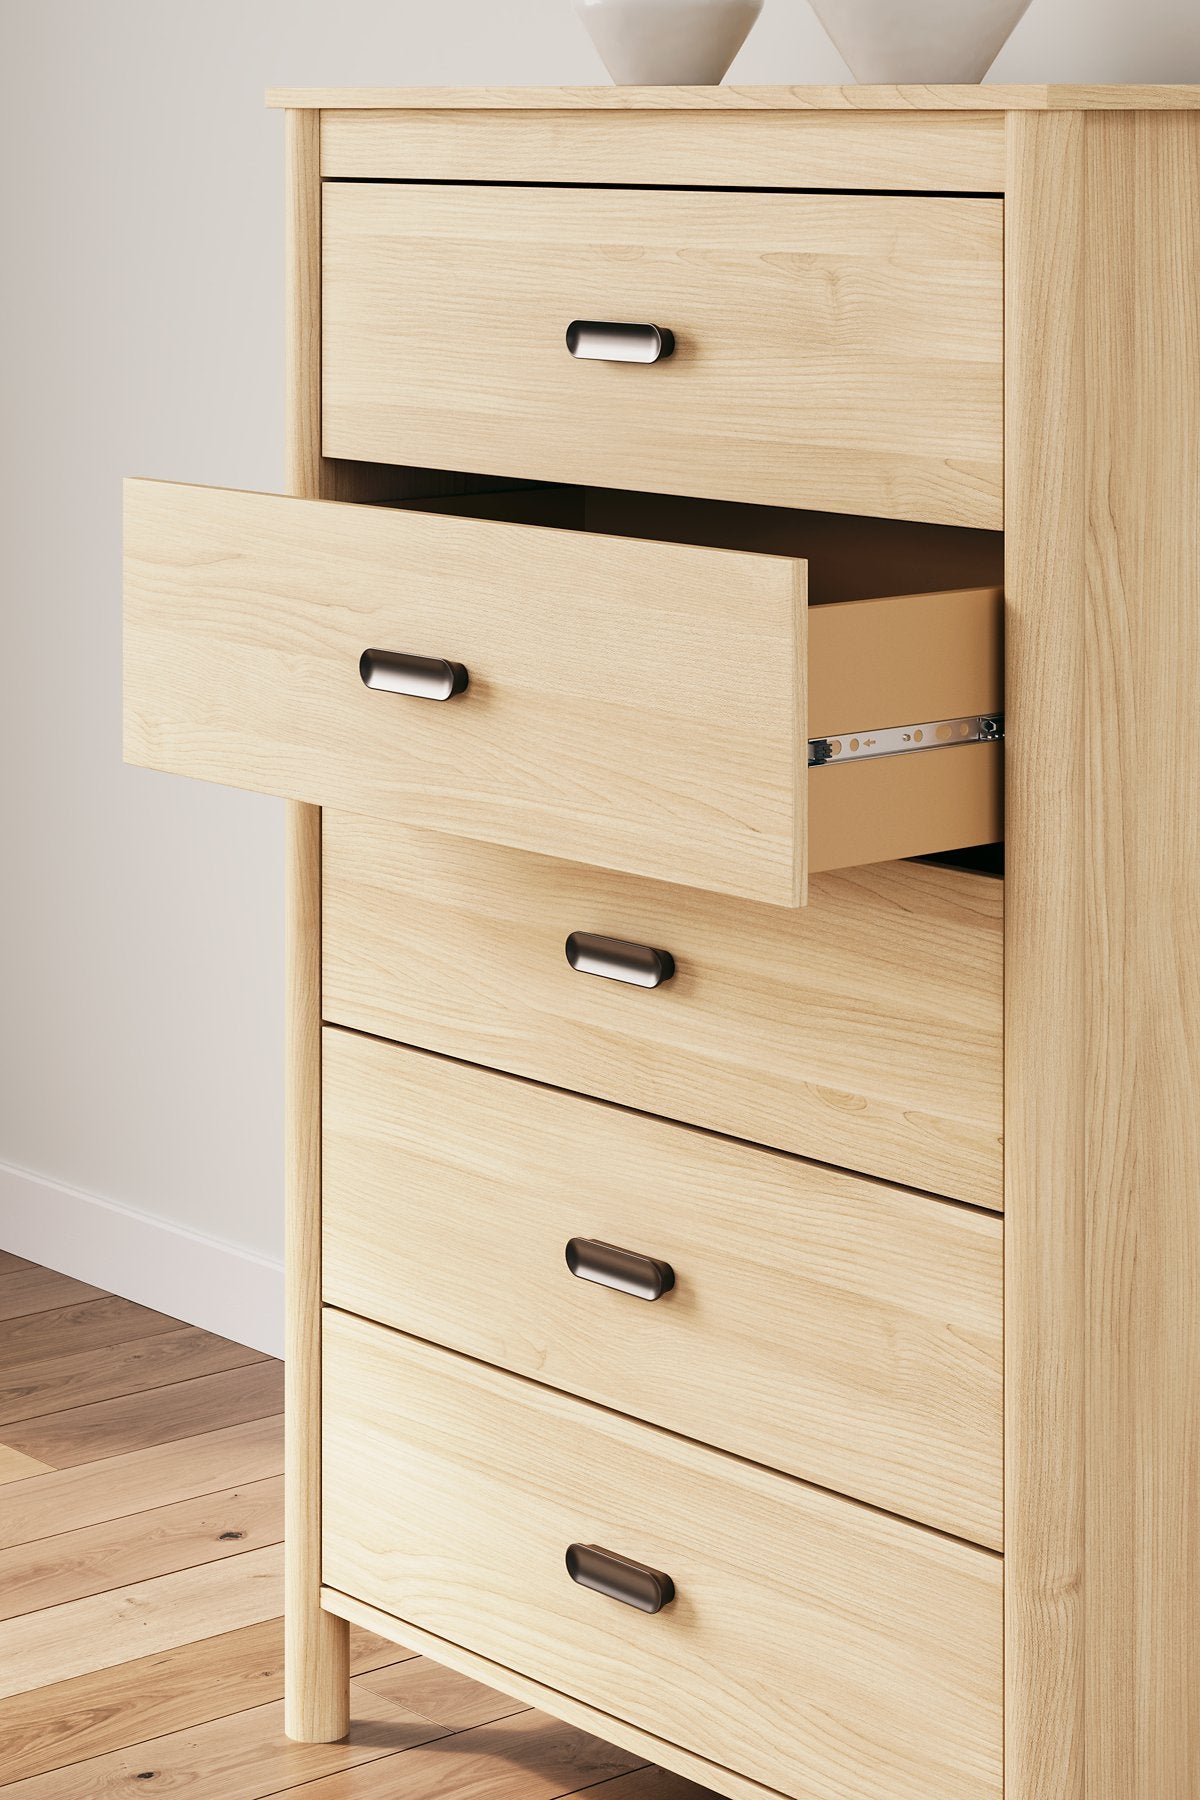 Cabinella Chest of Drawers